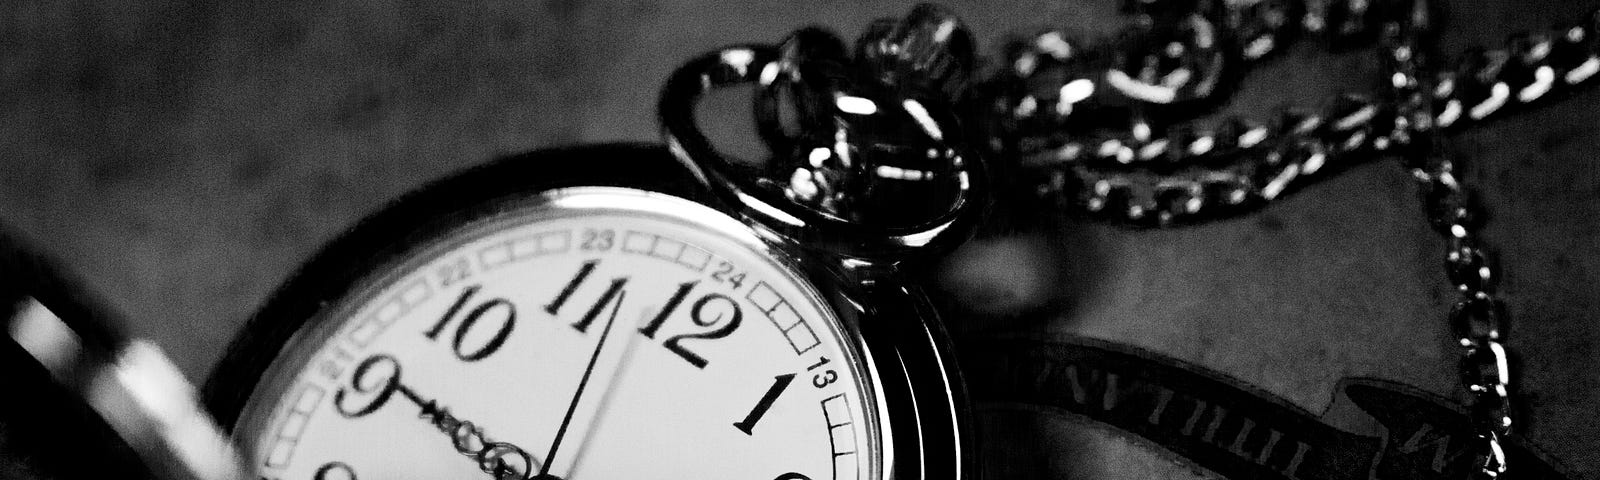 black and white picture of a pocket watch